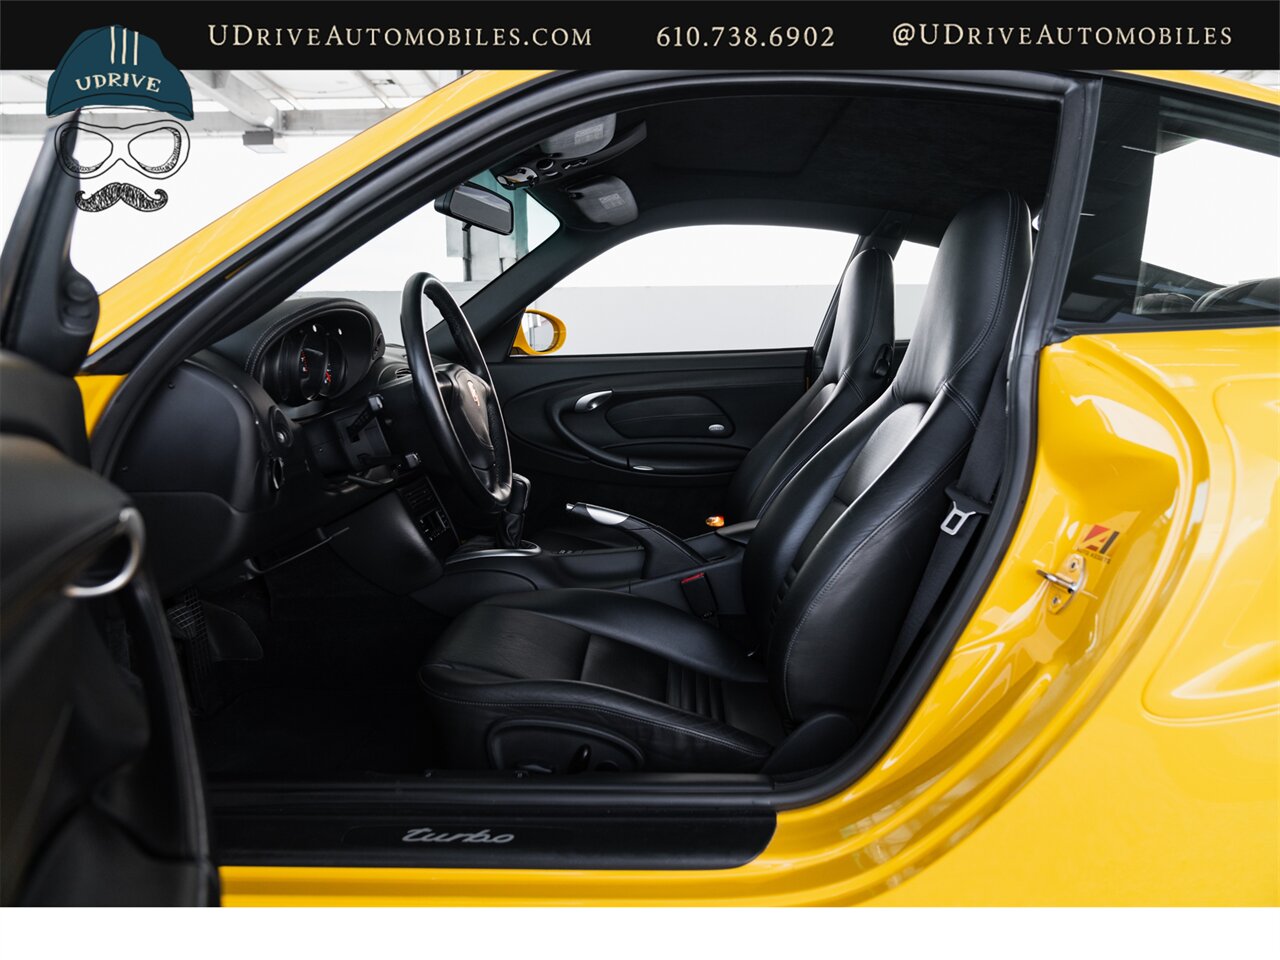 2001 Porsche 911 Turbo  996 6 Speed Detailed Service History Speed Yellow - Photo 37 - West Chester, PA 19382